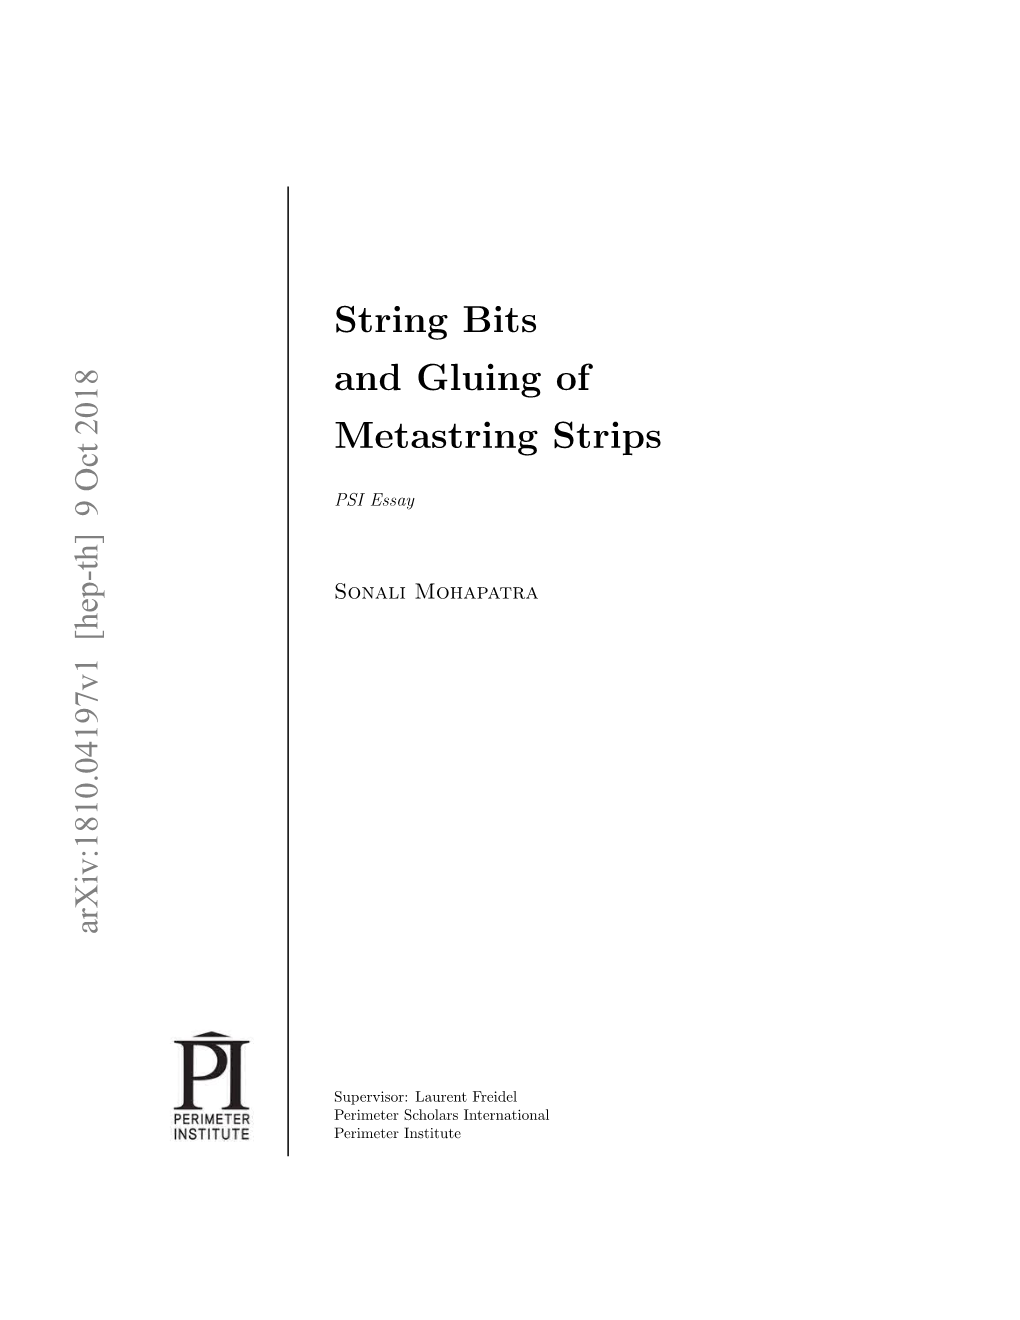 String Bits and Gluing of Metastring Strips